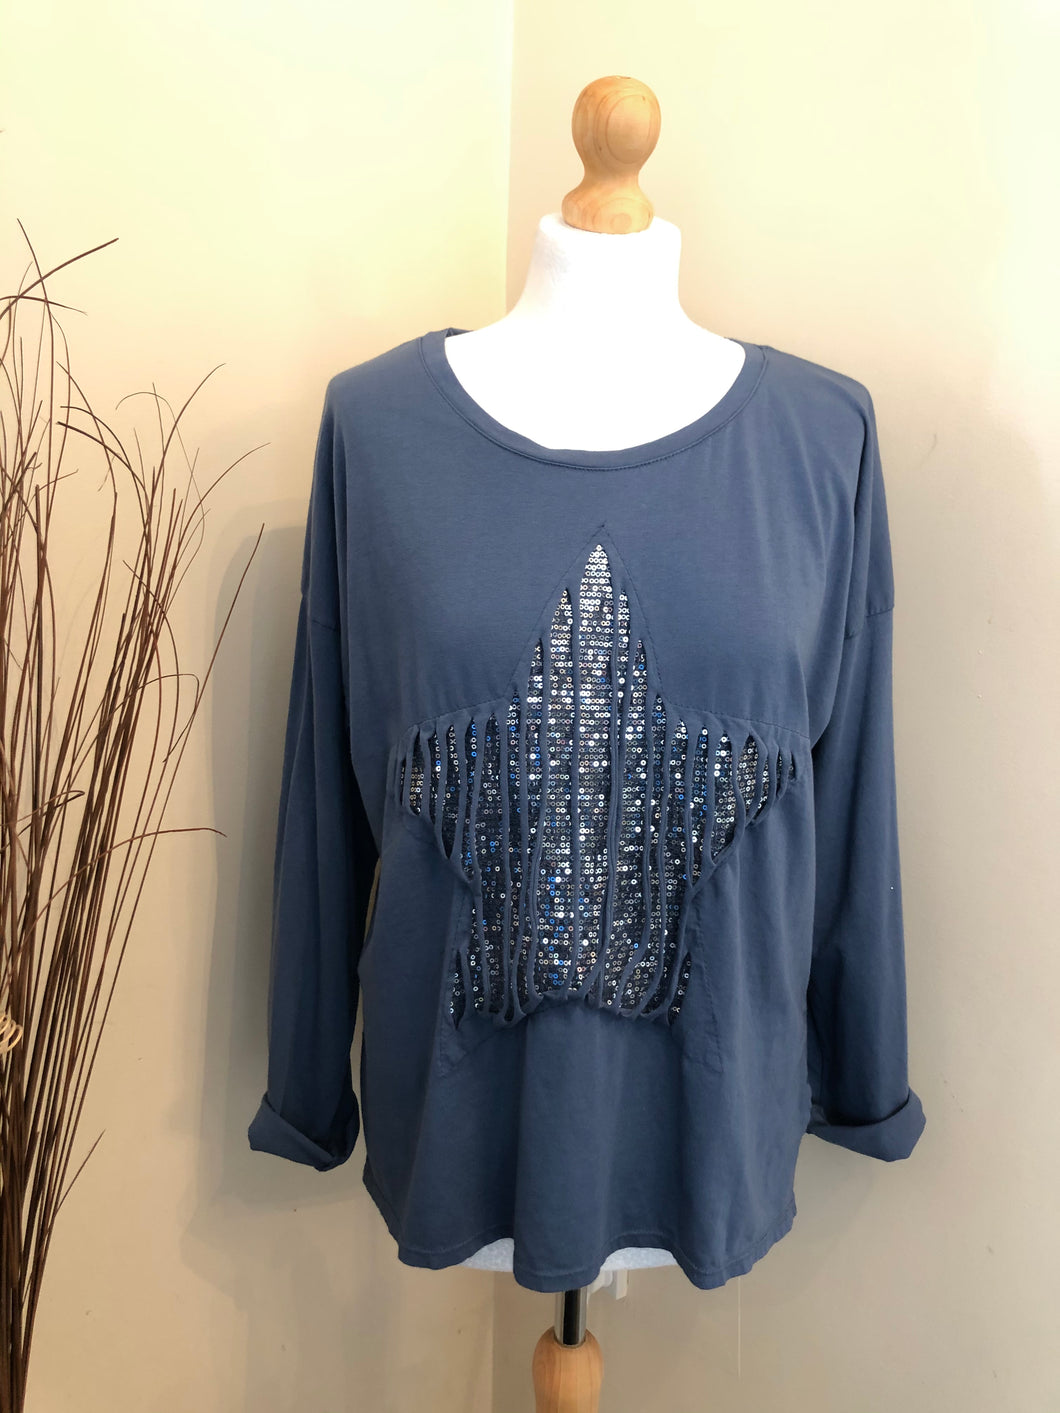 Ladies DENIM BLUE Oversized Quirky Sparkly Star Design Top - One Size 8 - 16